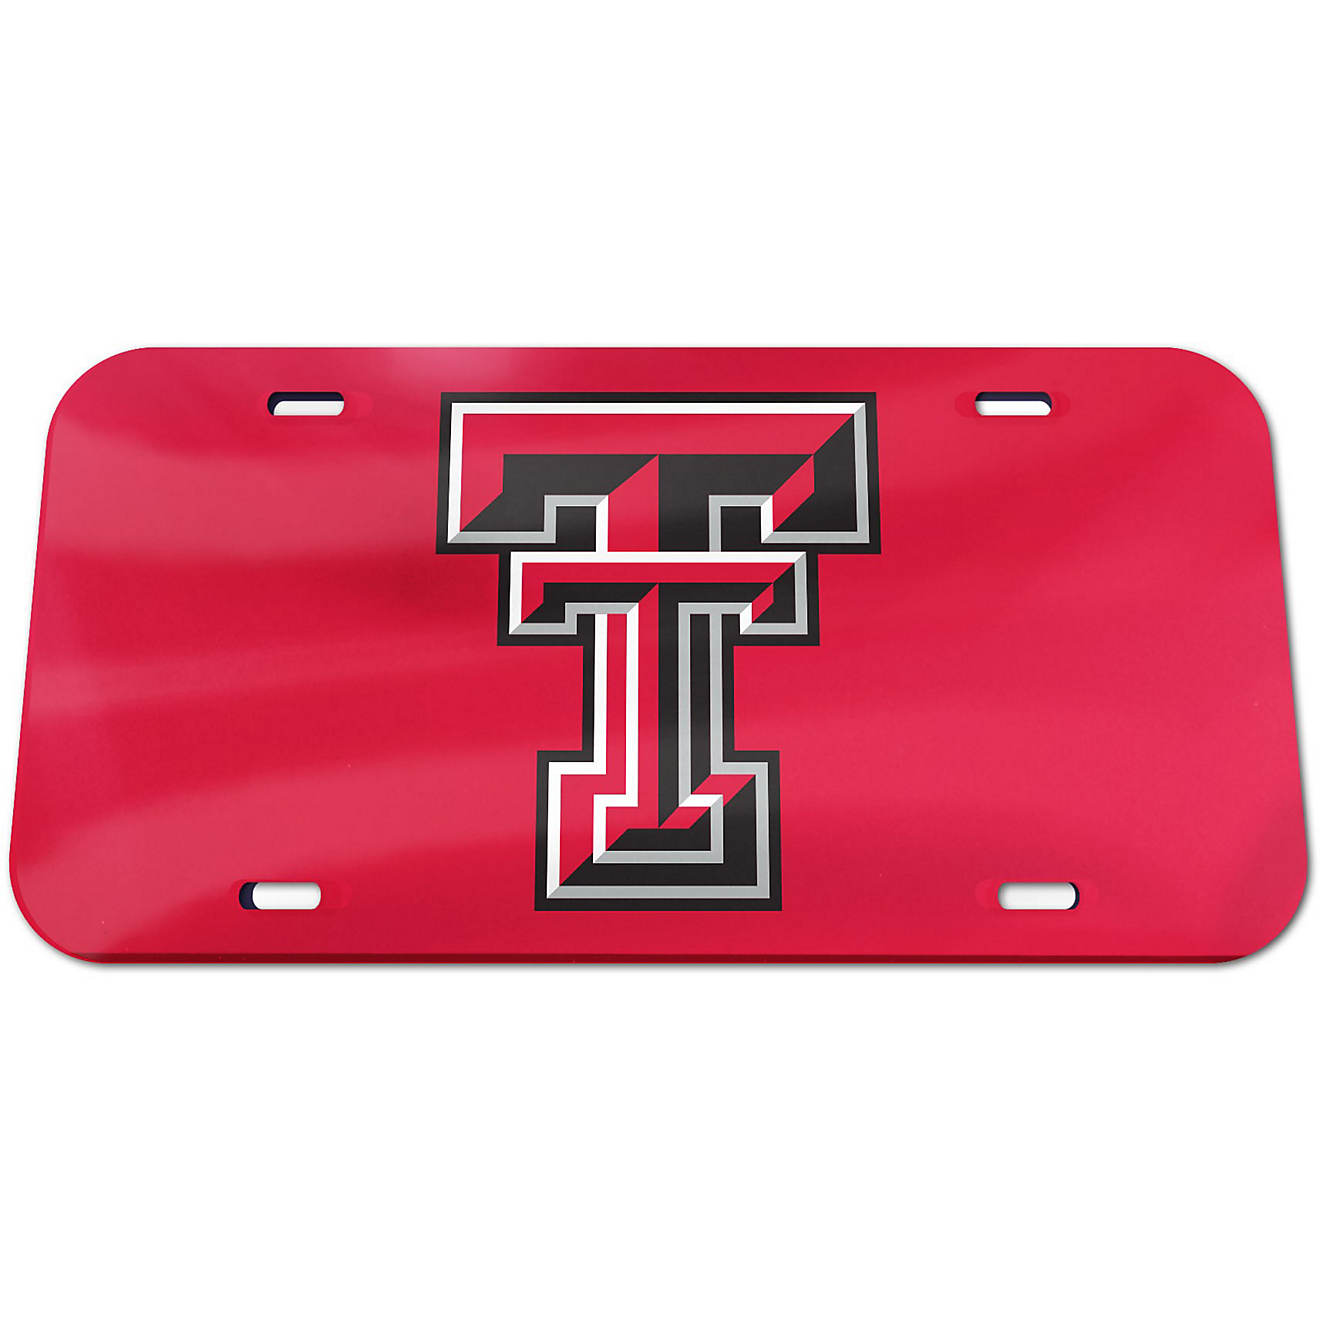 University of S69394 Specialty Acrylic License Plate WinCraft Texas 